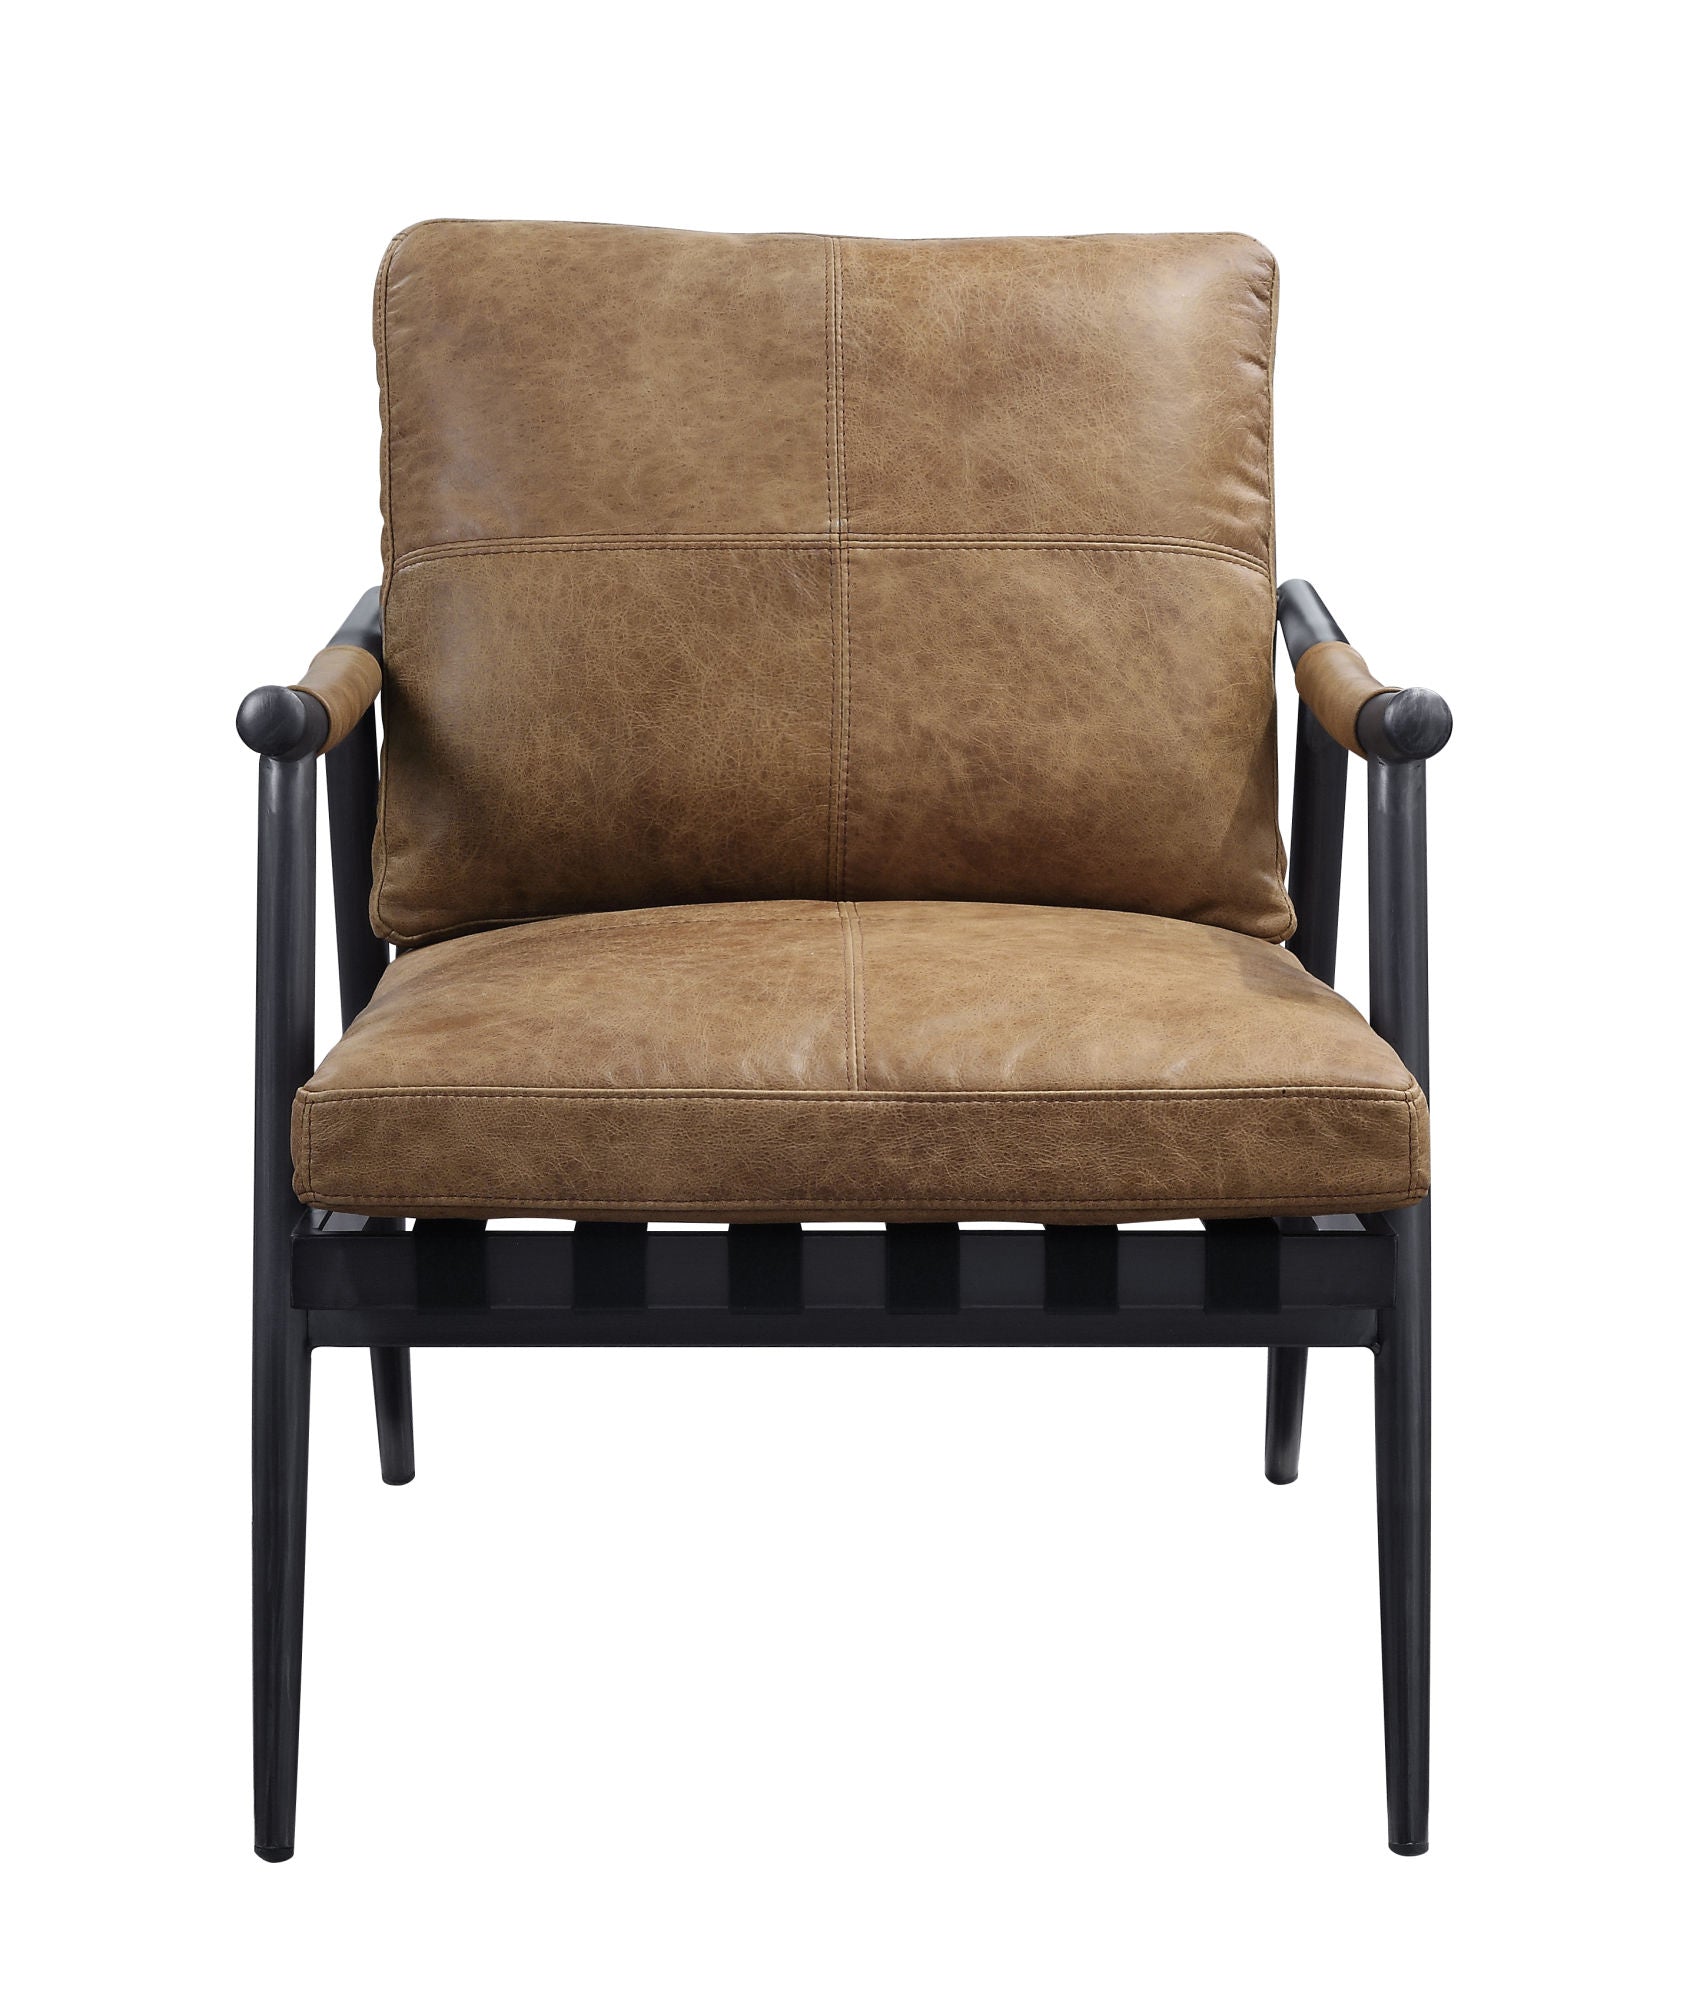 Modern Armchair for Living Room in Brown Leather front